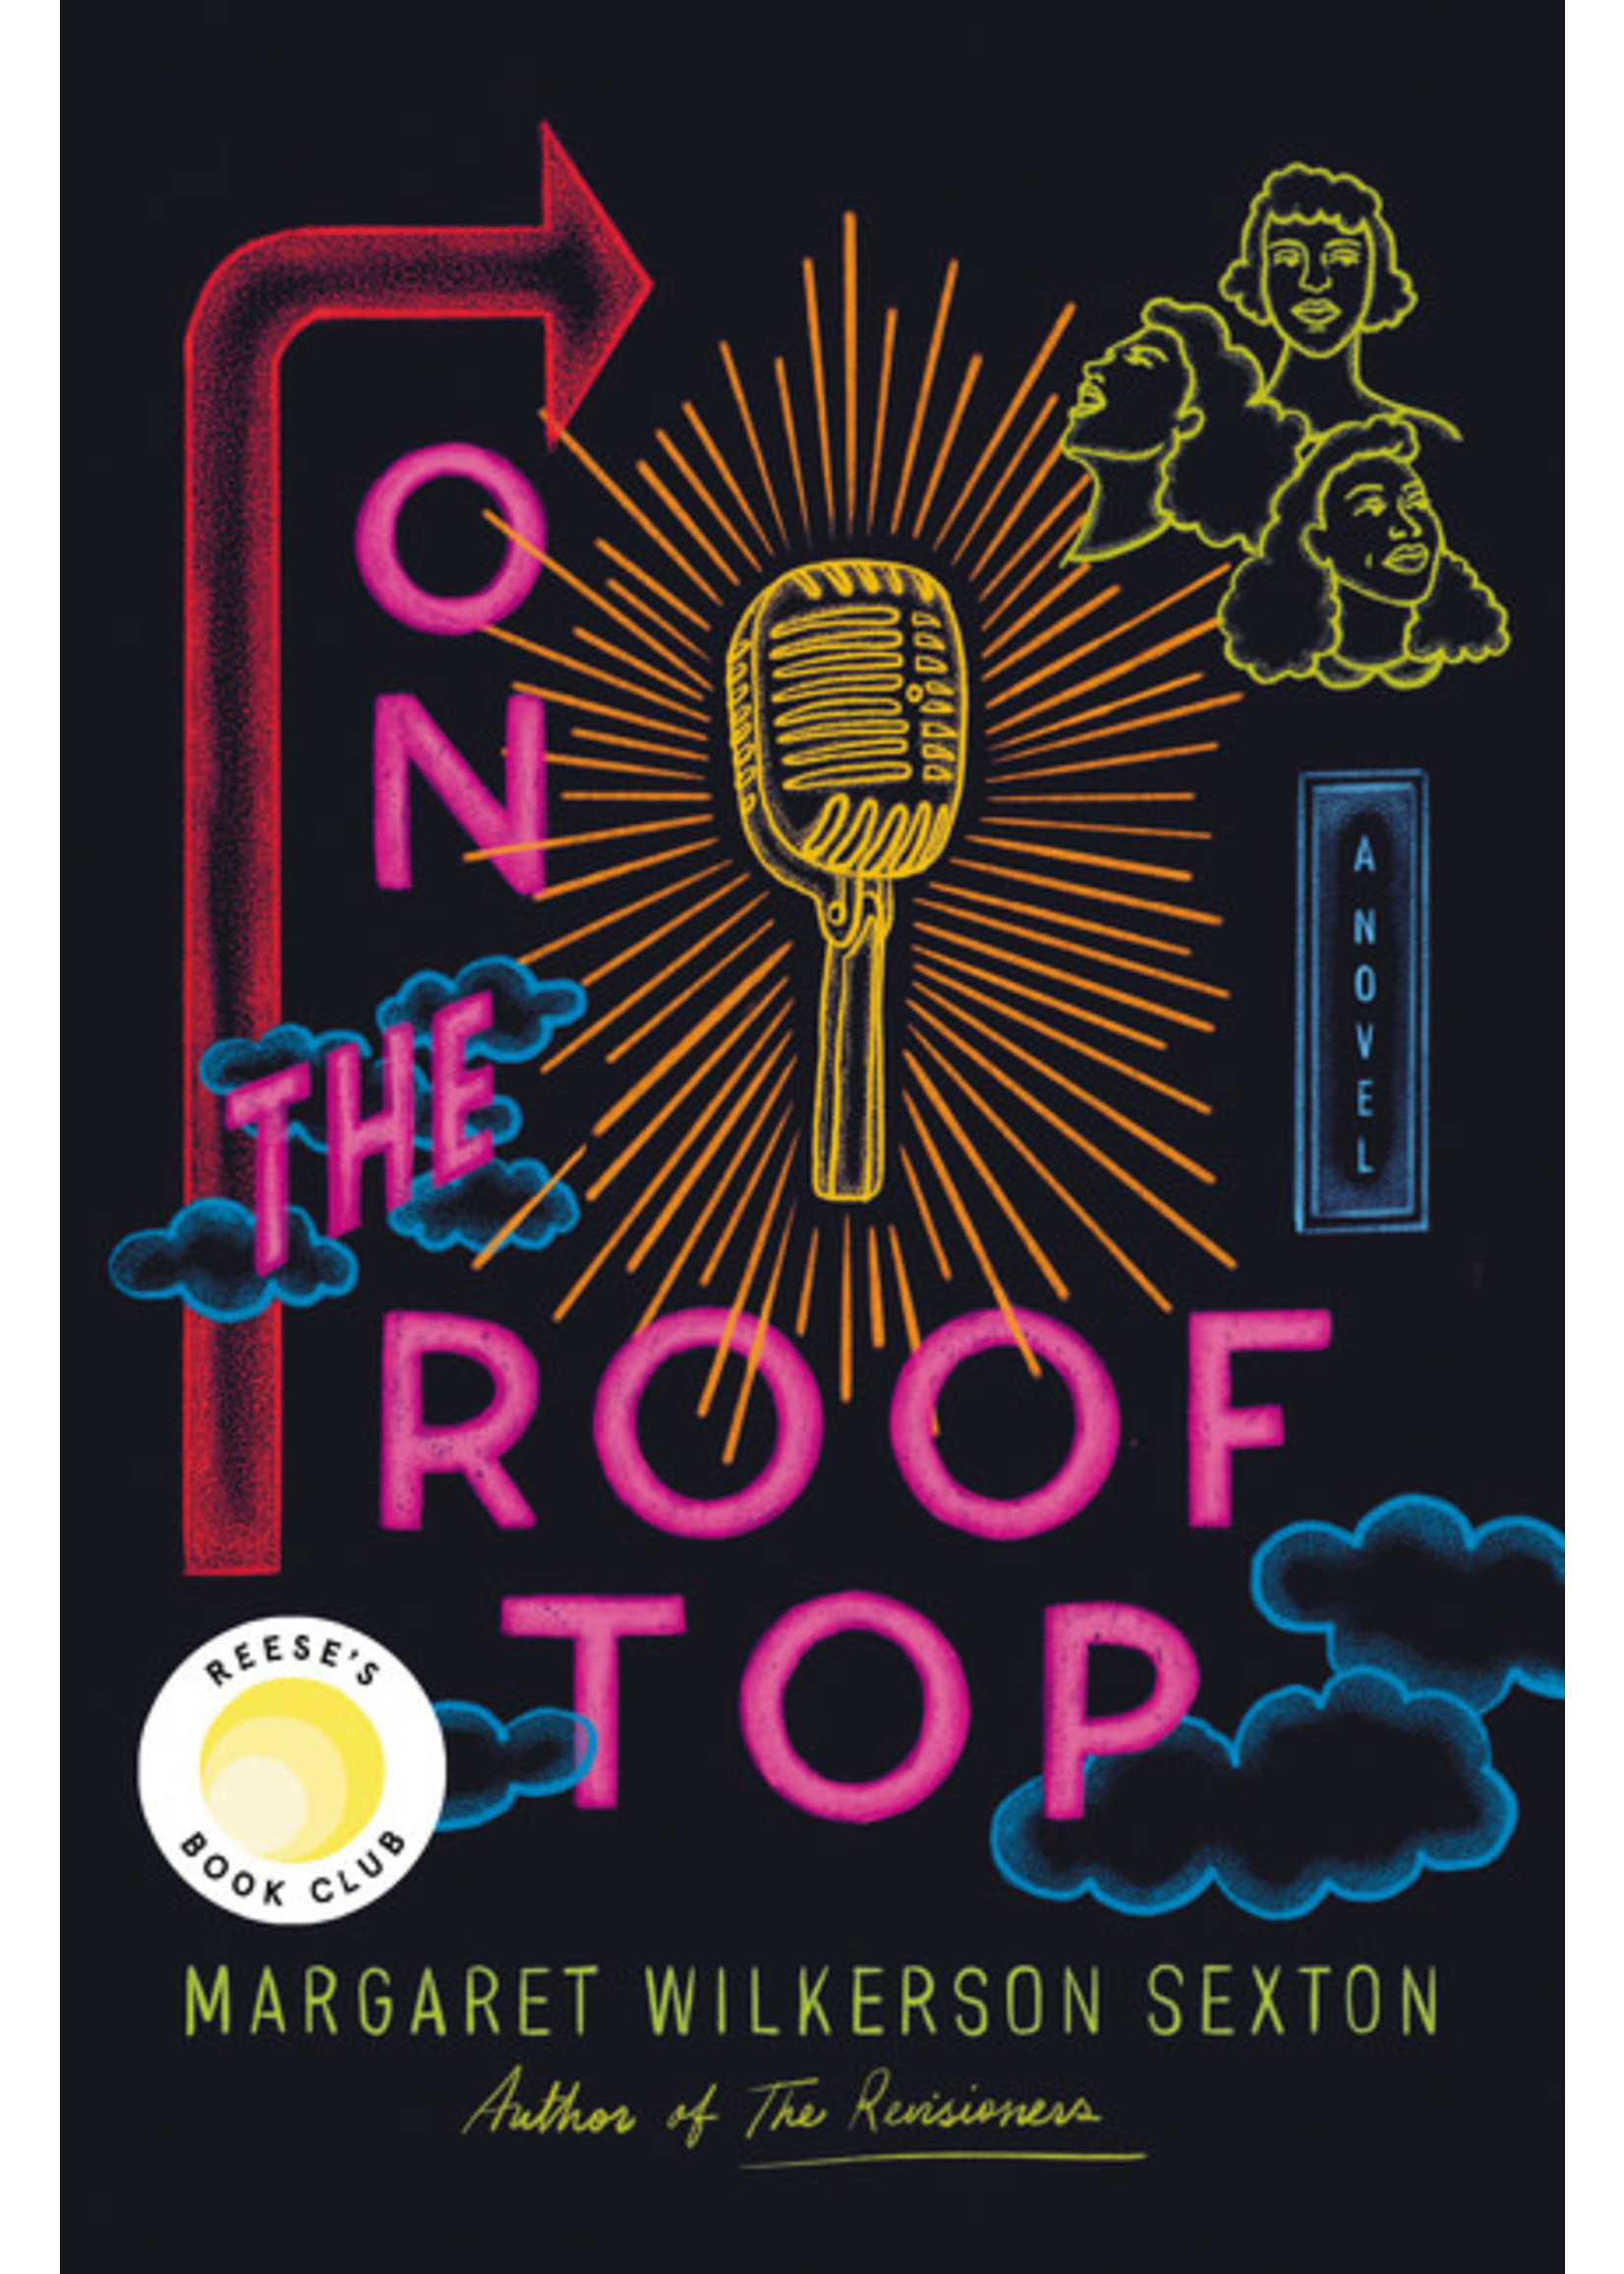 On the Rooftop by Margaret Wilkerson Sexton